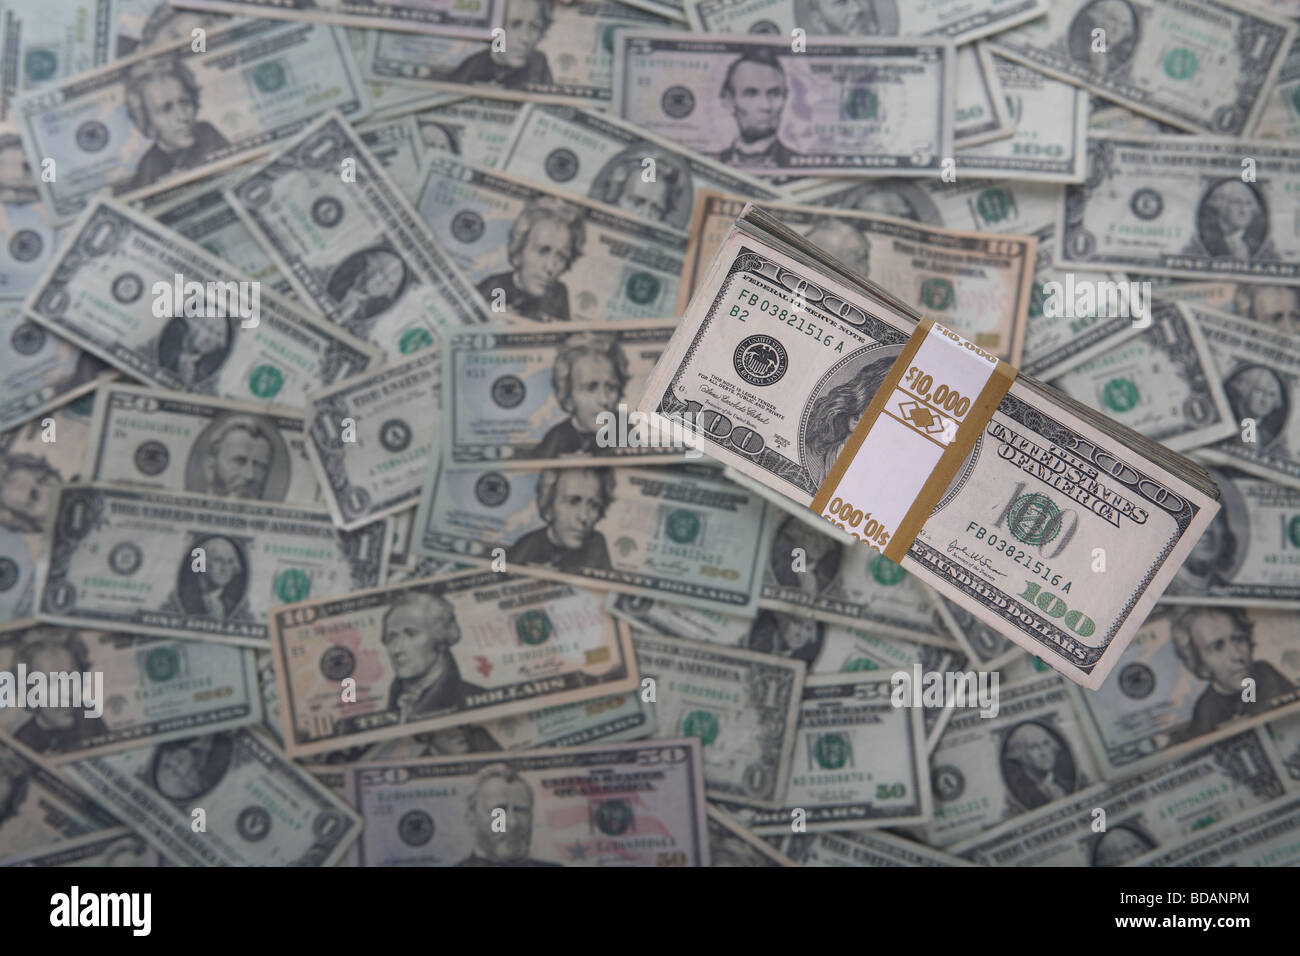 A bundled stack of 100 dollar bills on a moderately soft background of US currency Stock Photo